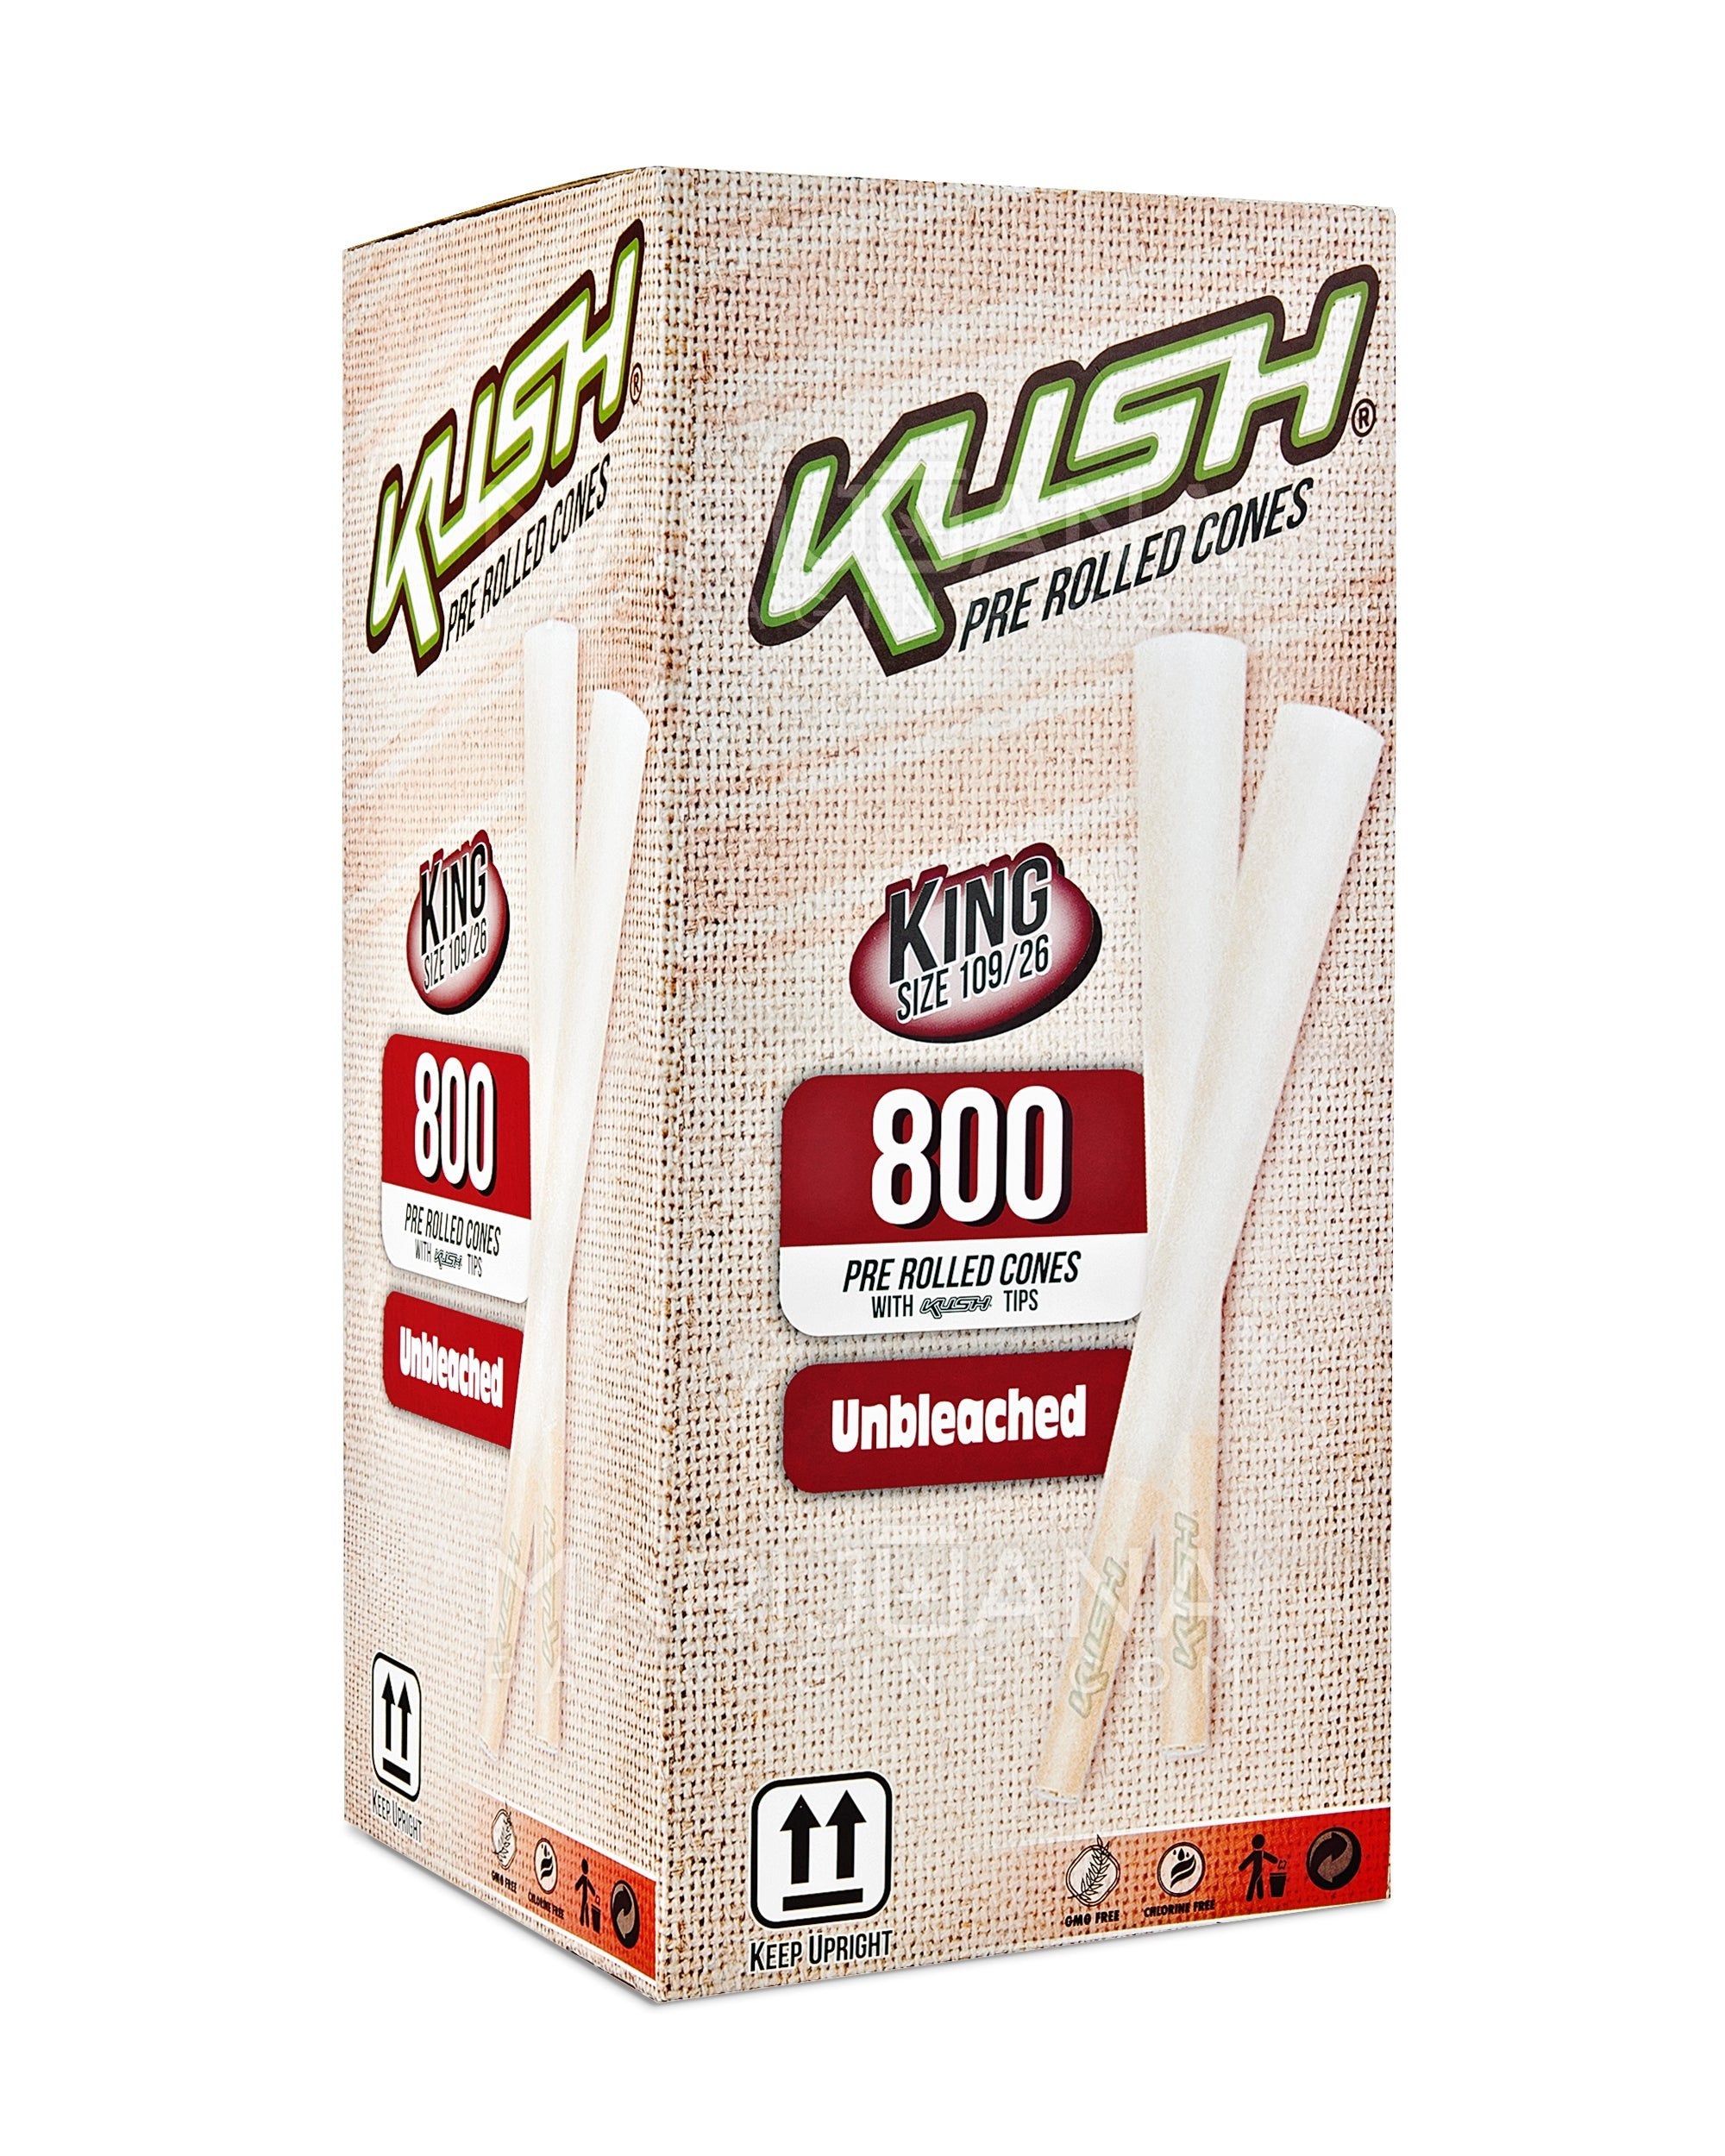 OCB 109mm King Sized Virgin Pre Rolled Unbleached Paper Cones 800/Box